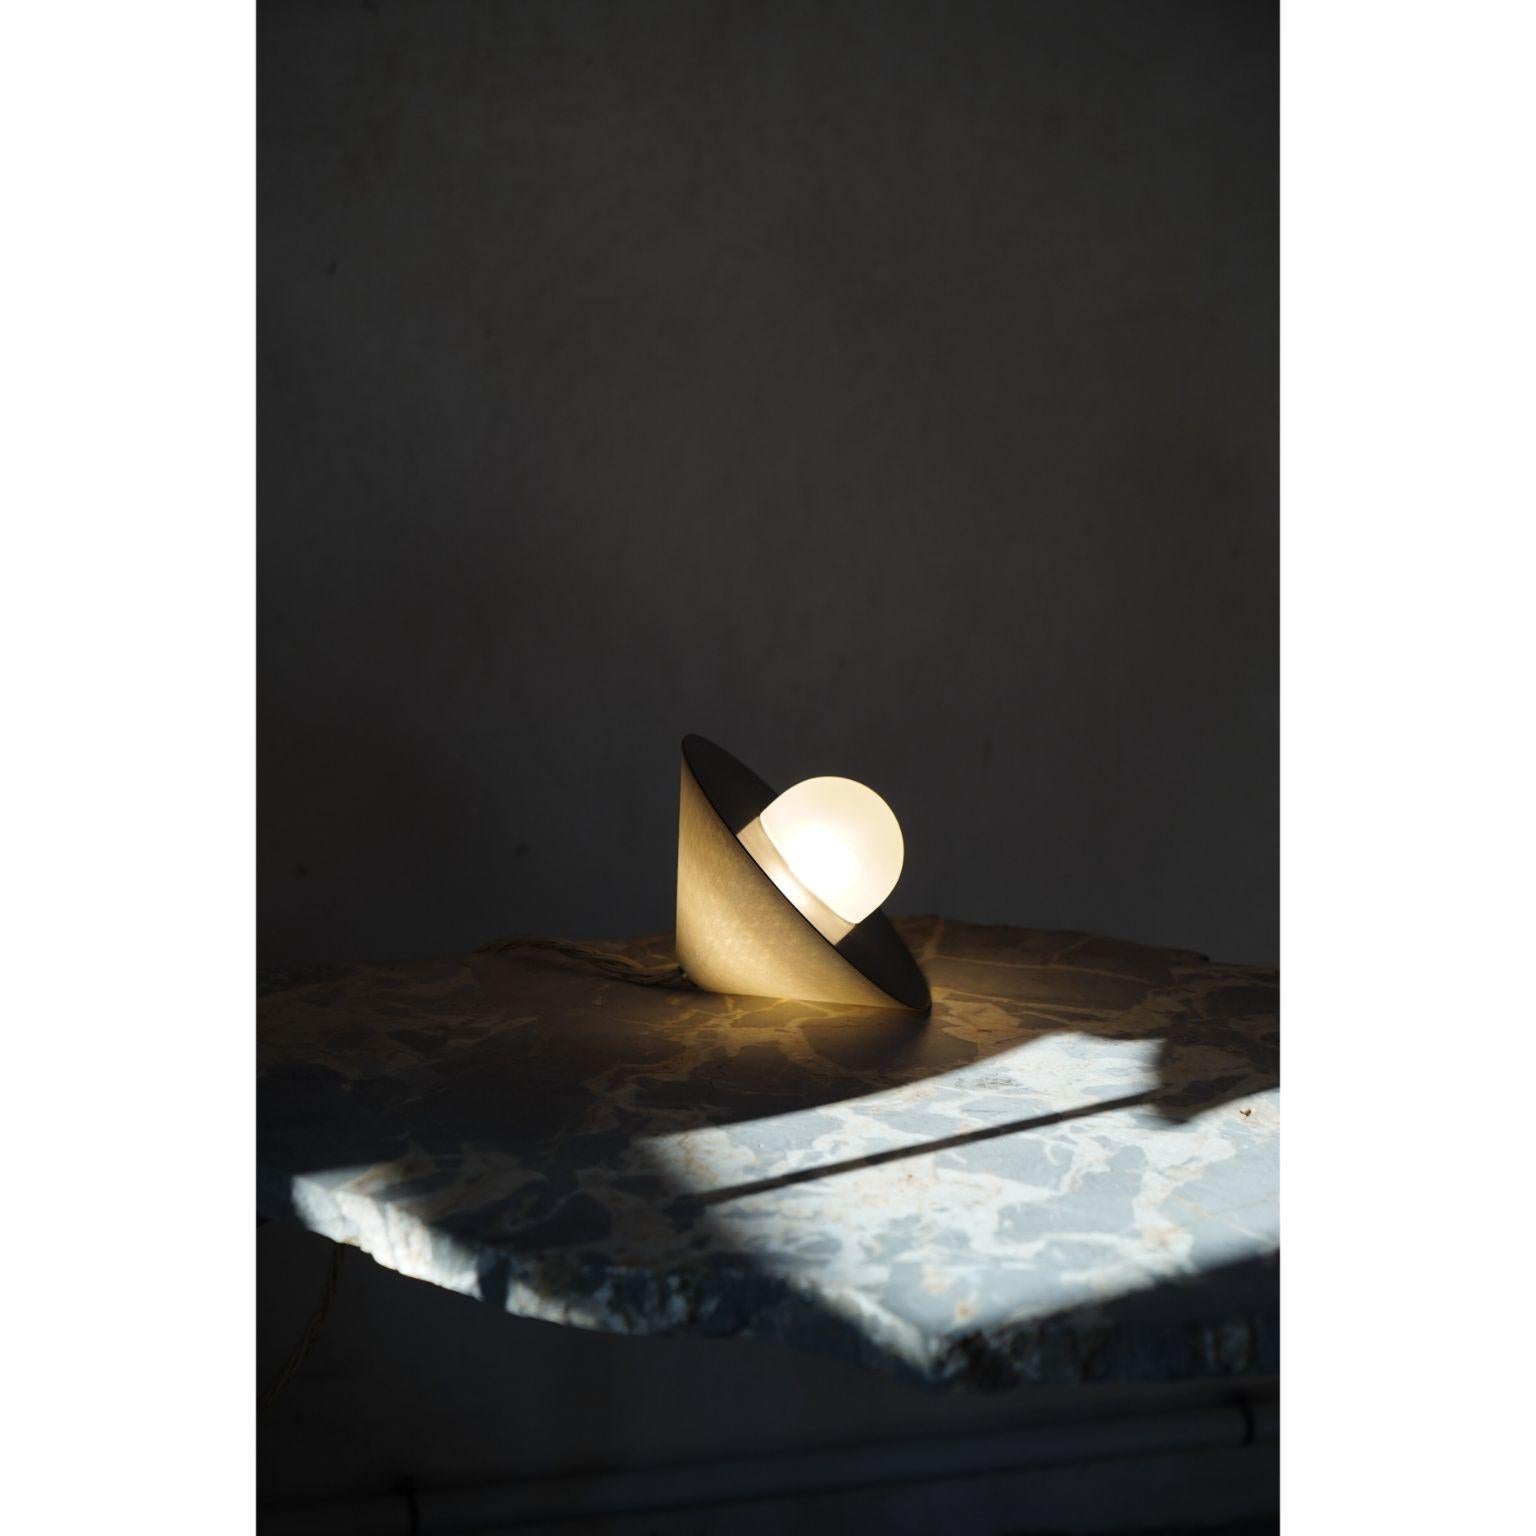 Alba top table lamp by Contain
Dimensions: D15x W15 xH12 cm 
Materials: brass, 3D printed PLA structure and optical lens.
Also available in different finishes and dimensions (22 cm Ø x 15 cm Ø x 12 cm).

All our lamps can be wired according to